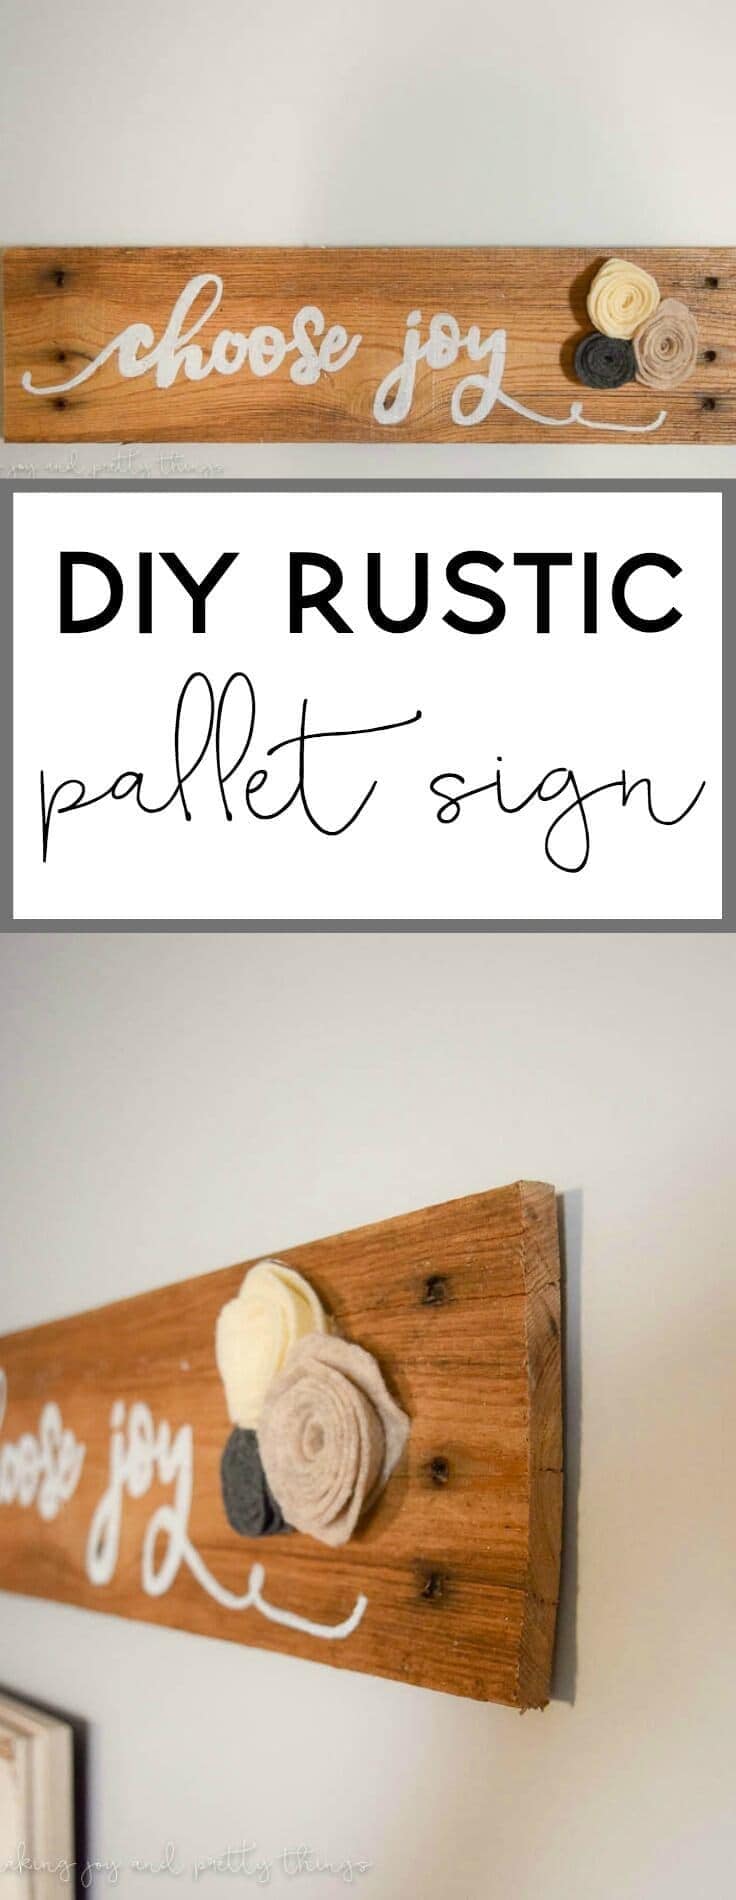 DIY Rustic Pallet Sign - simple farmhouse style sign to add the signature fixer upper look to a gallery wall or blank space!